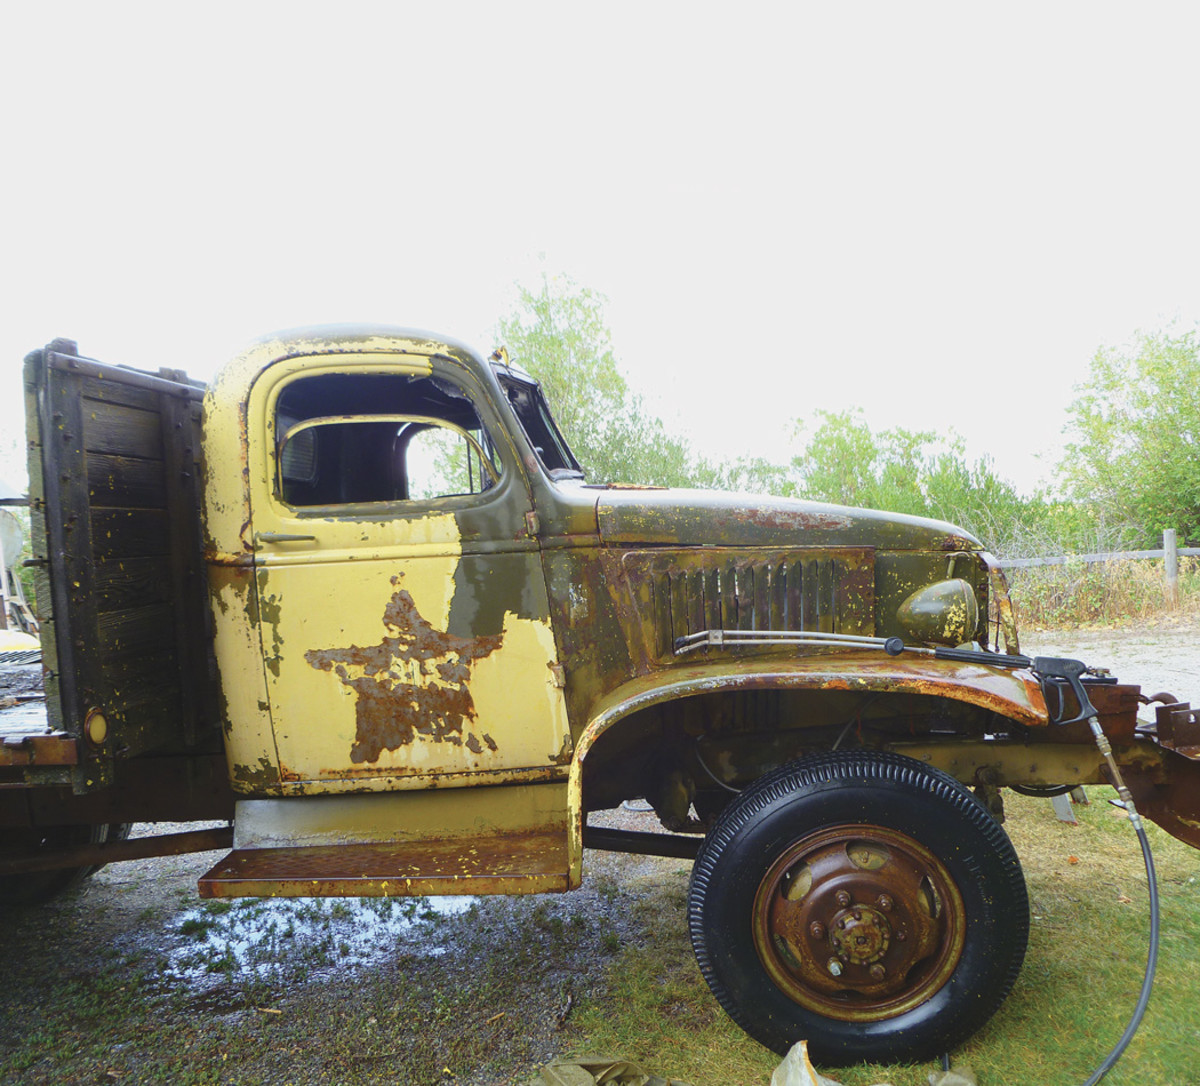 This 1942 closed cab GMC CCKW is an example of a truck that was painted yellow years ago. It was easily uncovered using a commercial steam cleaner to reveal the original olive drab green paint.